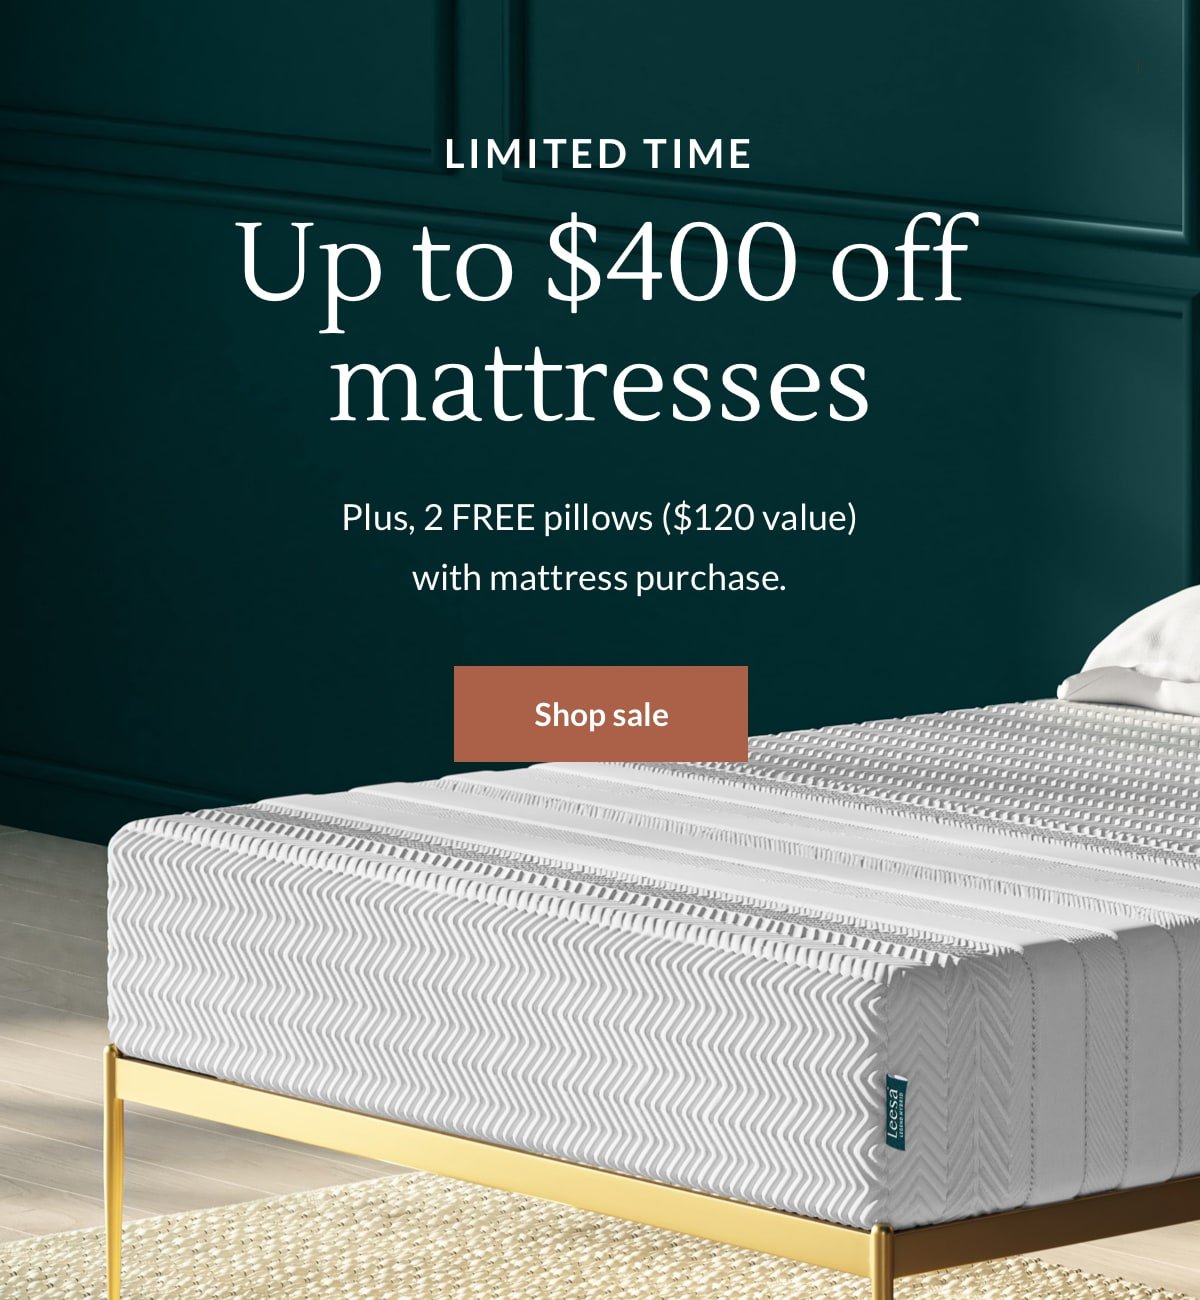 Limited time: Up to $400 off mattresses